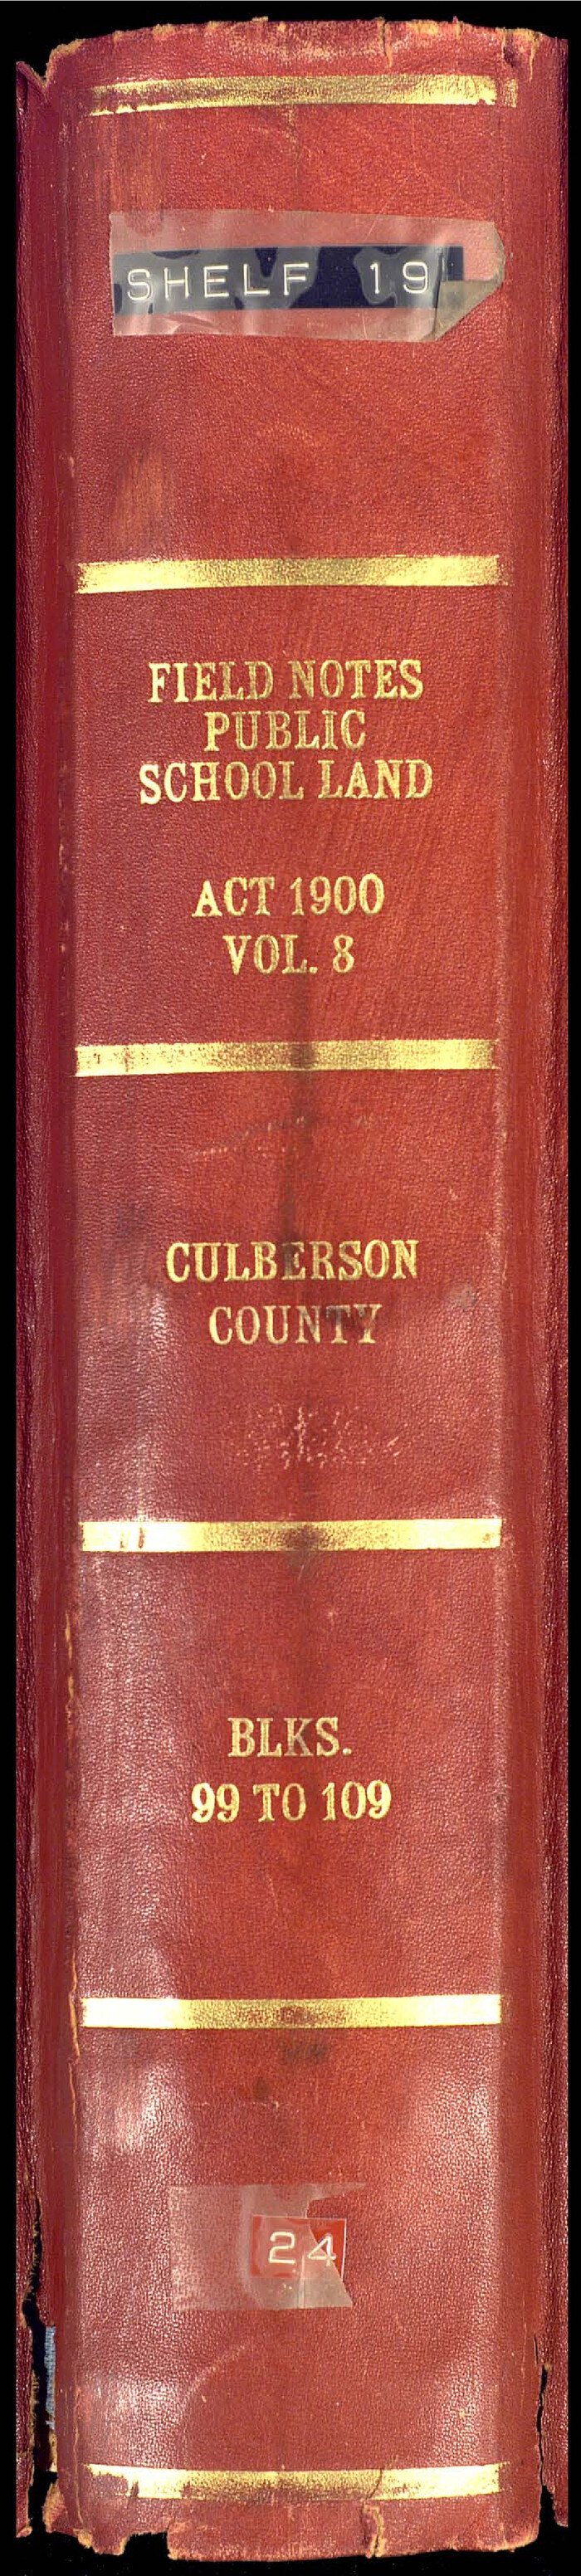 81665, PSL Field Notes for Blocks 99, 100, 101, 103, 104, 105, 106, 107, 108, and 109 in Culberson County, General Map Collection